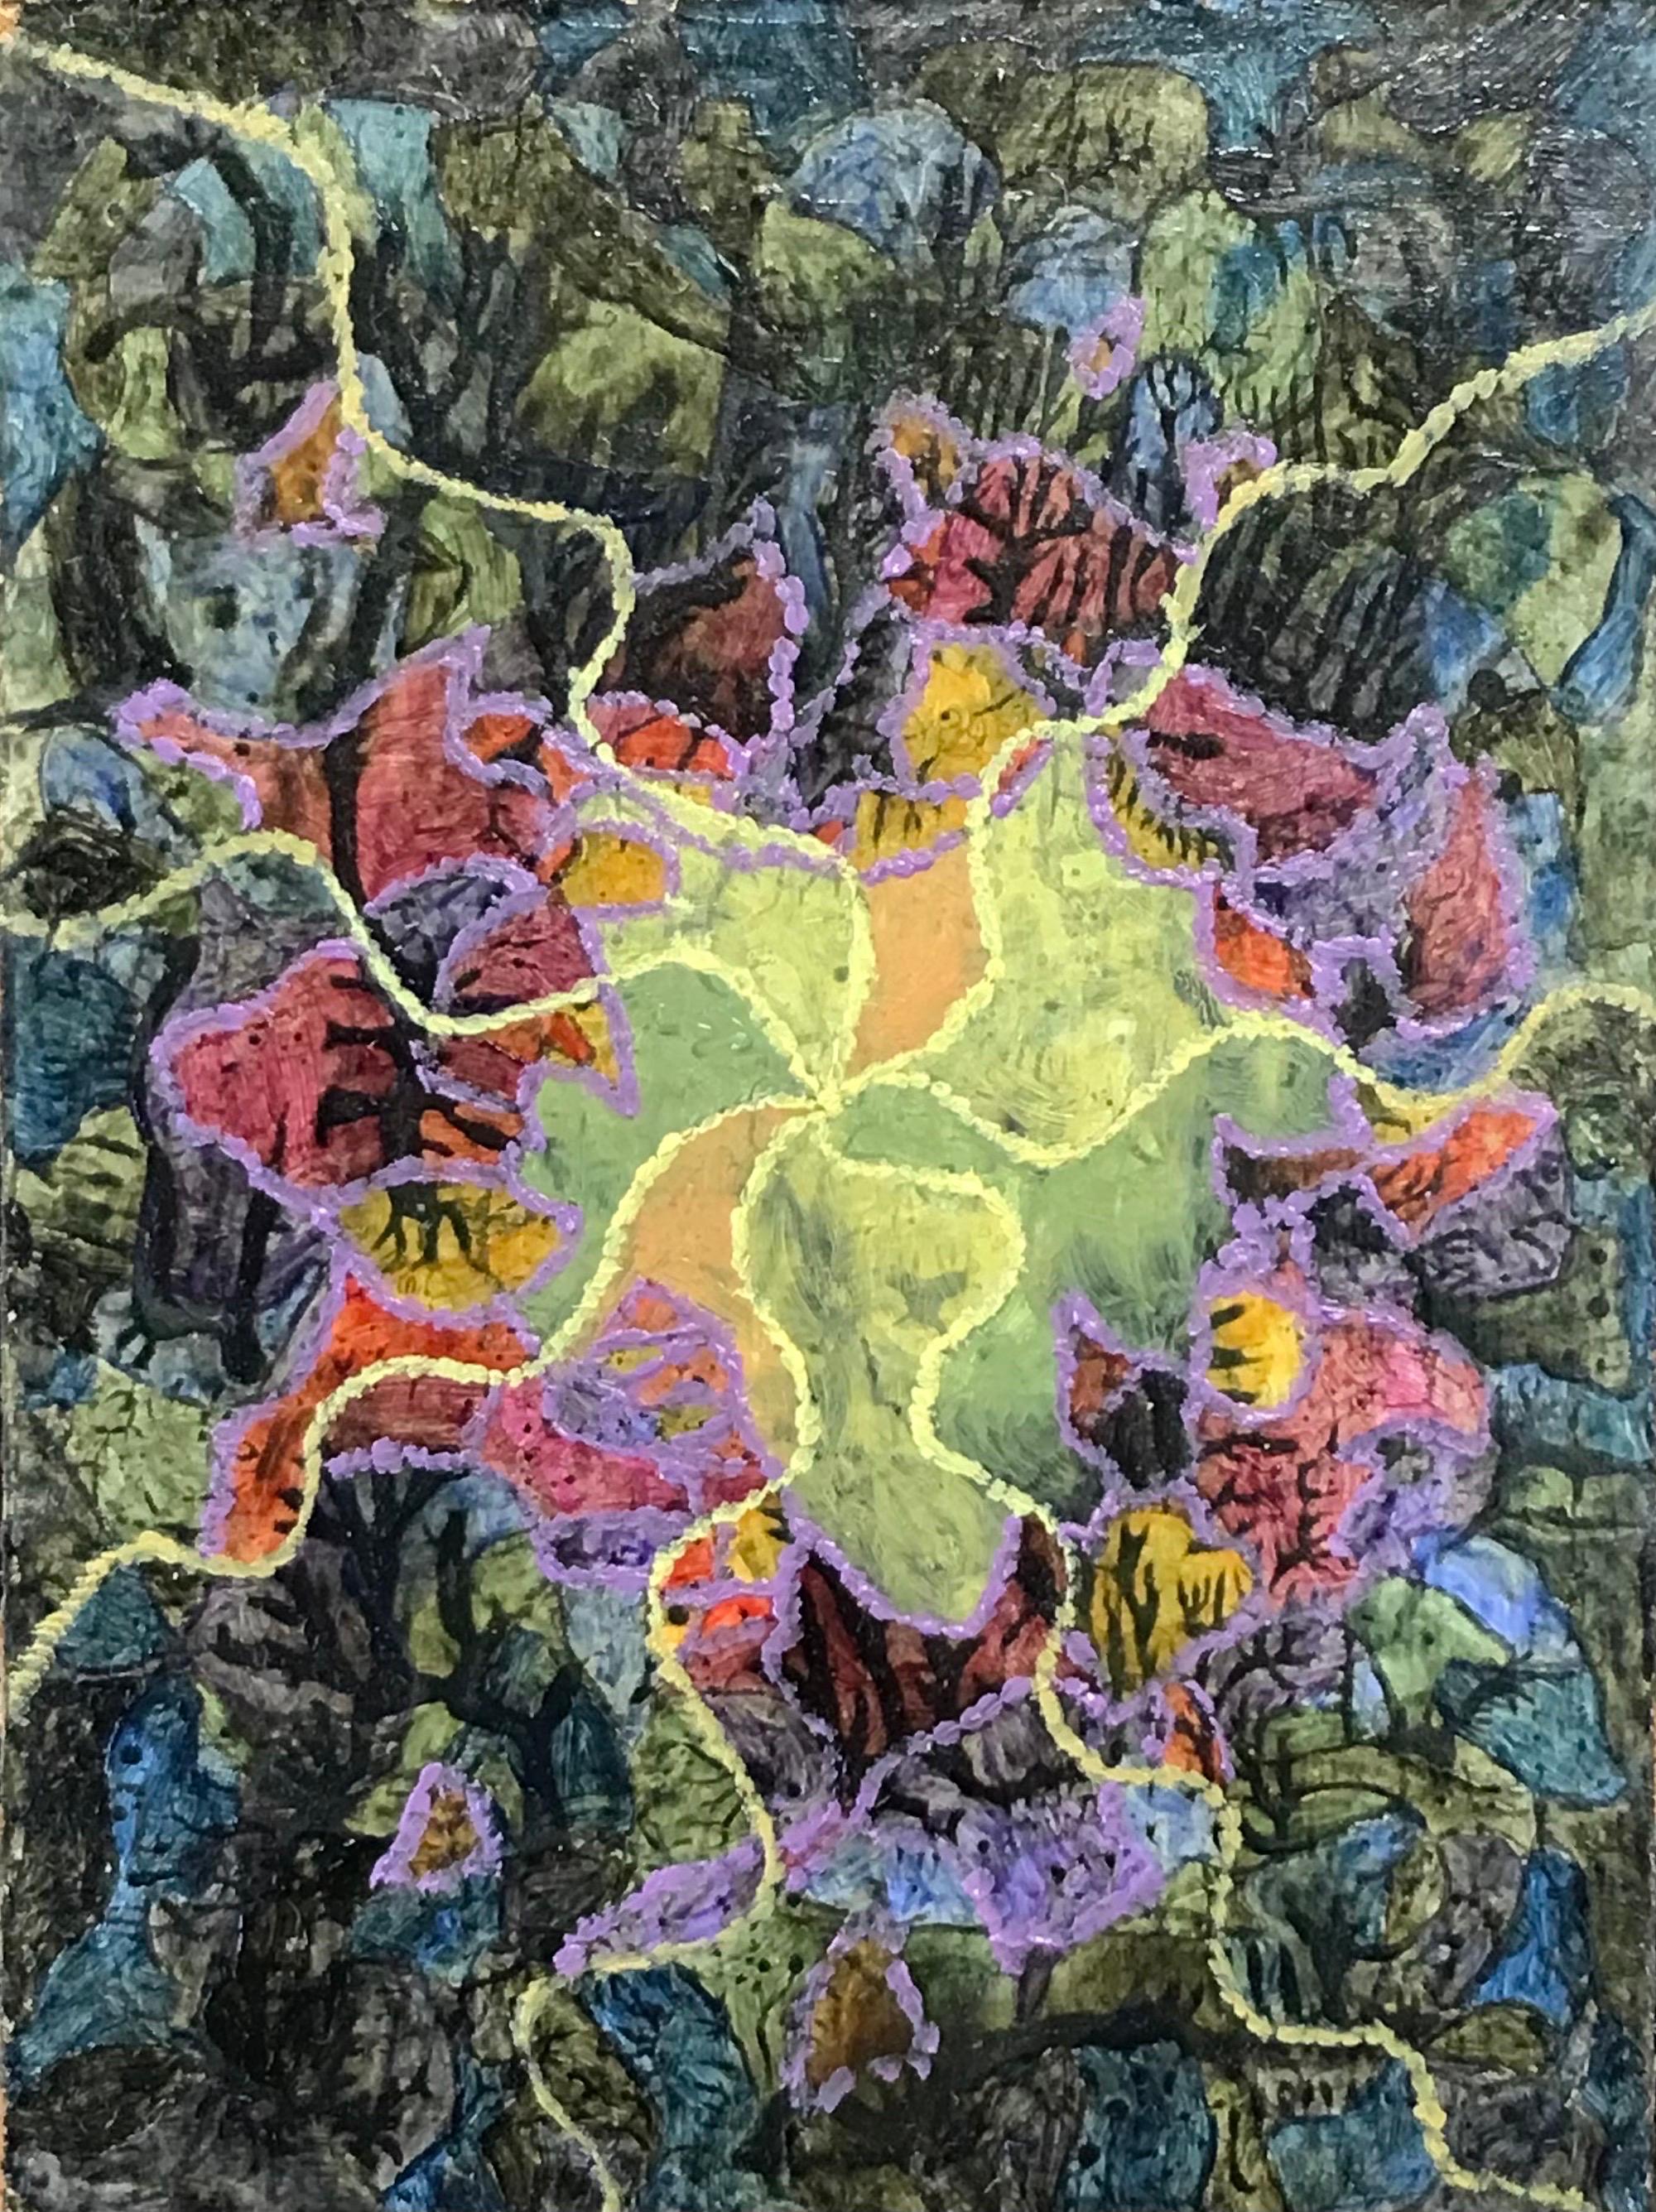 Elvic Steele Abstract Painting - 1960's British Surrealist Oil Painting - Abstract Fantasy Flower Explosion